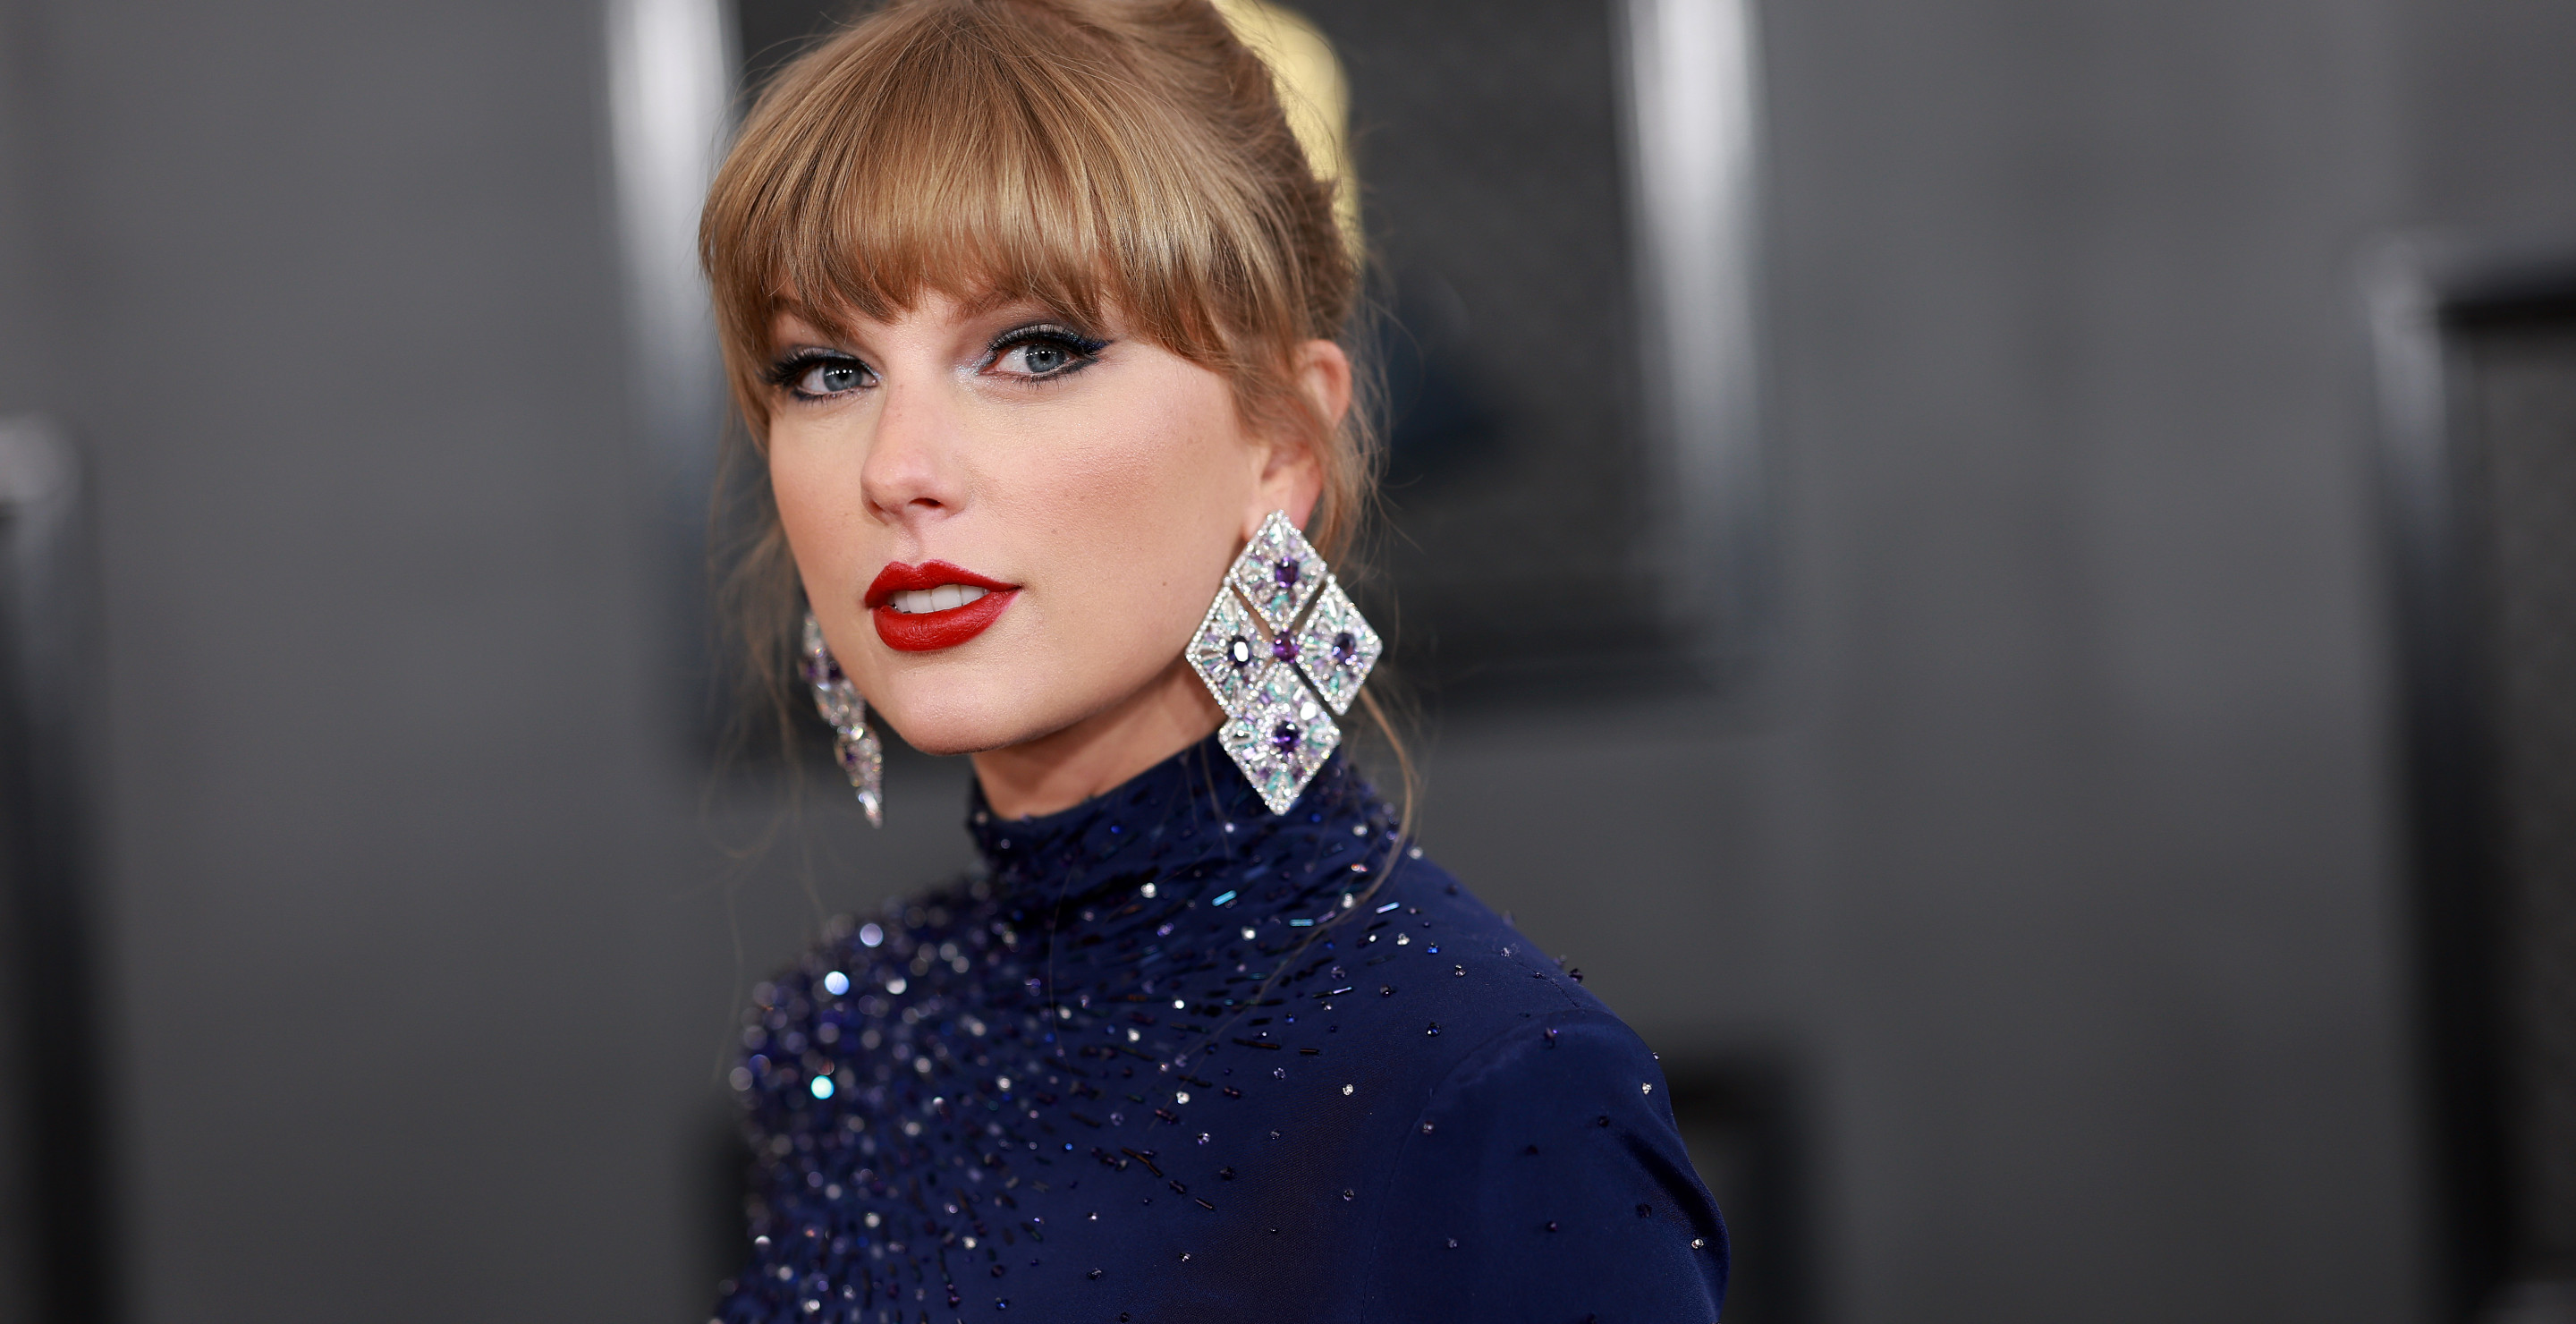 Taylor Swift's NYC Apartment Catches Fire But Singer Sprang Into Action